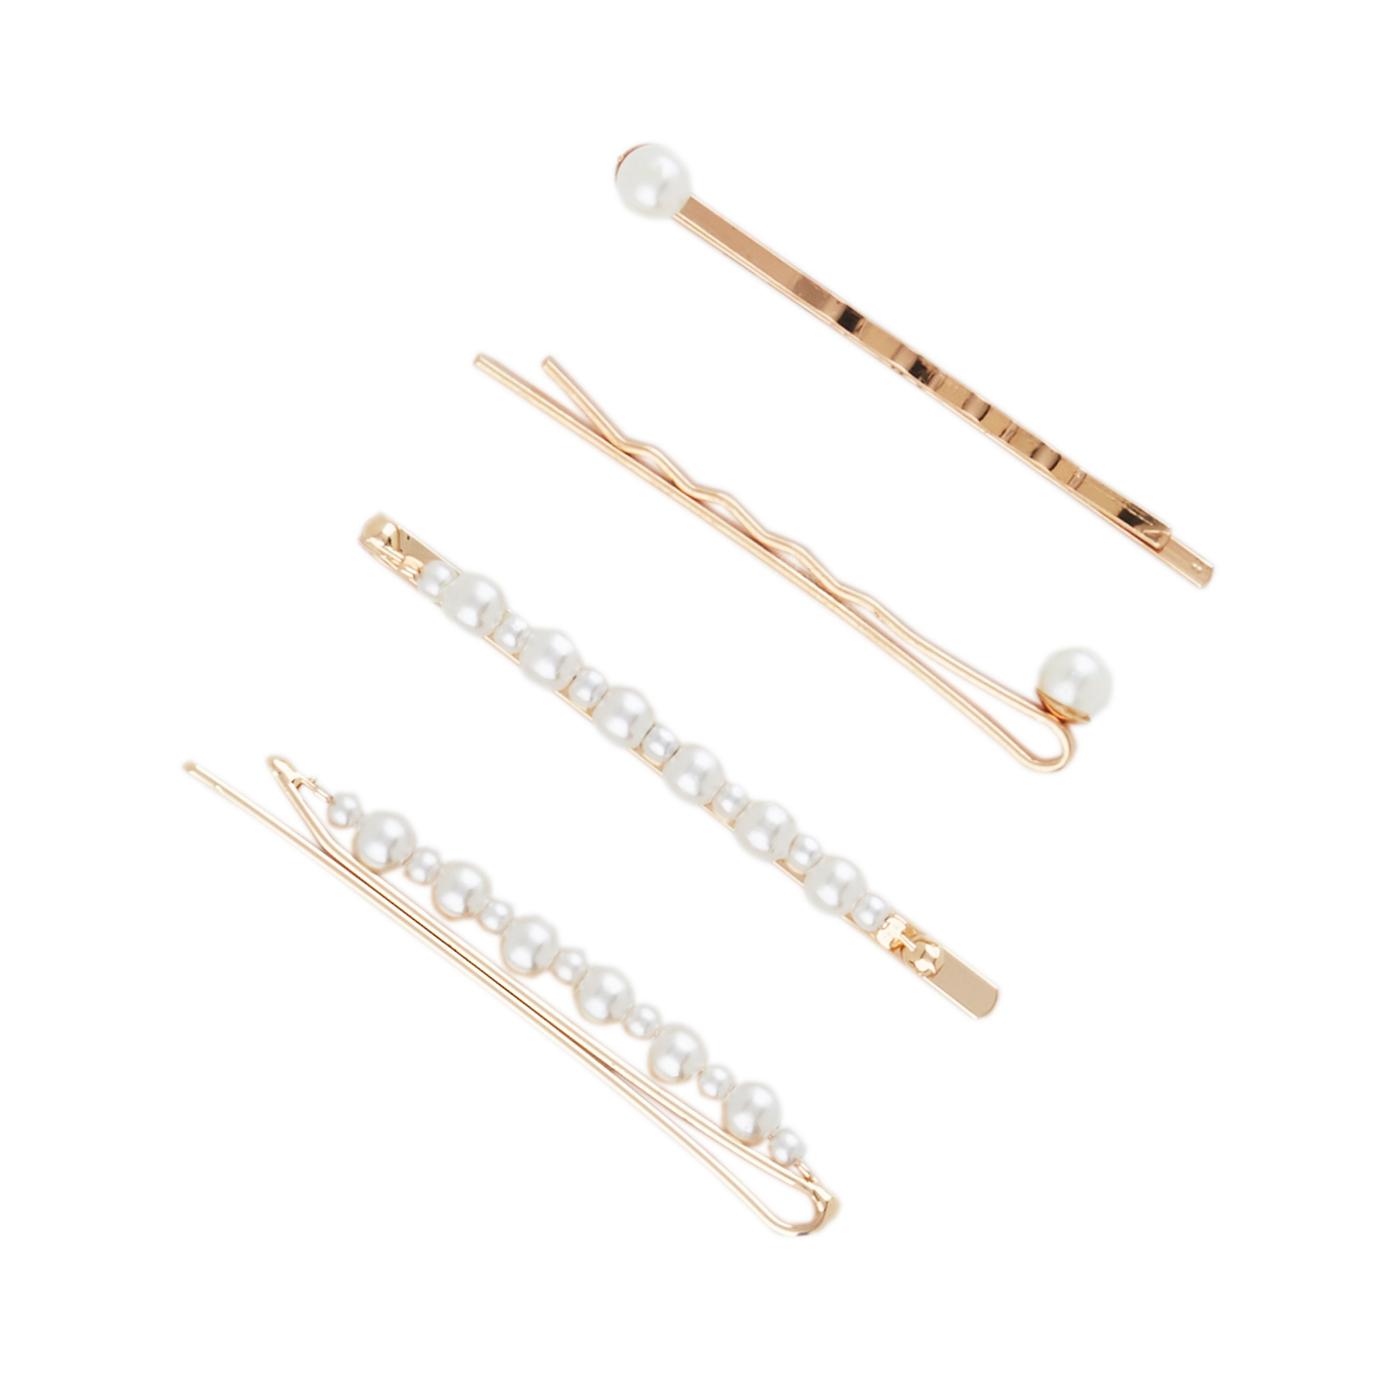 Scunci Pearl Bobby Pins; image 2 of 2